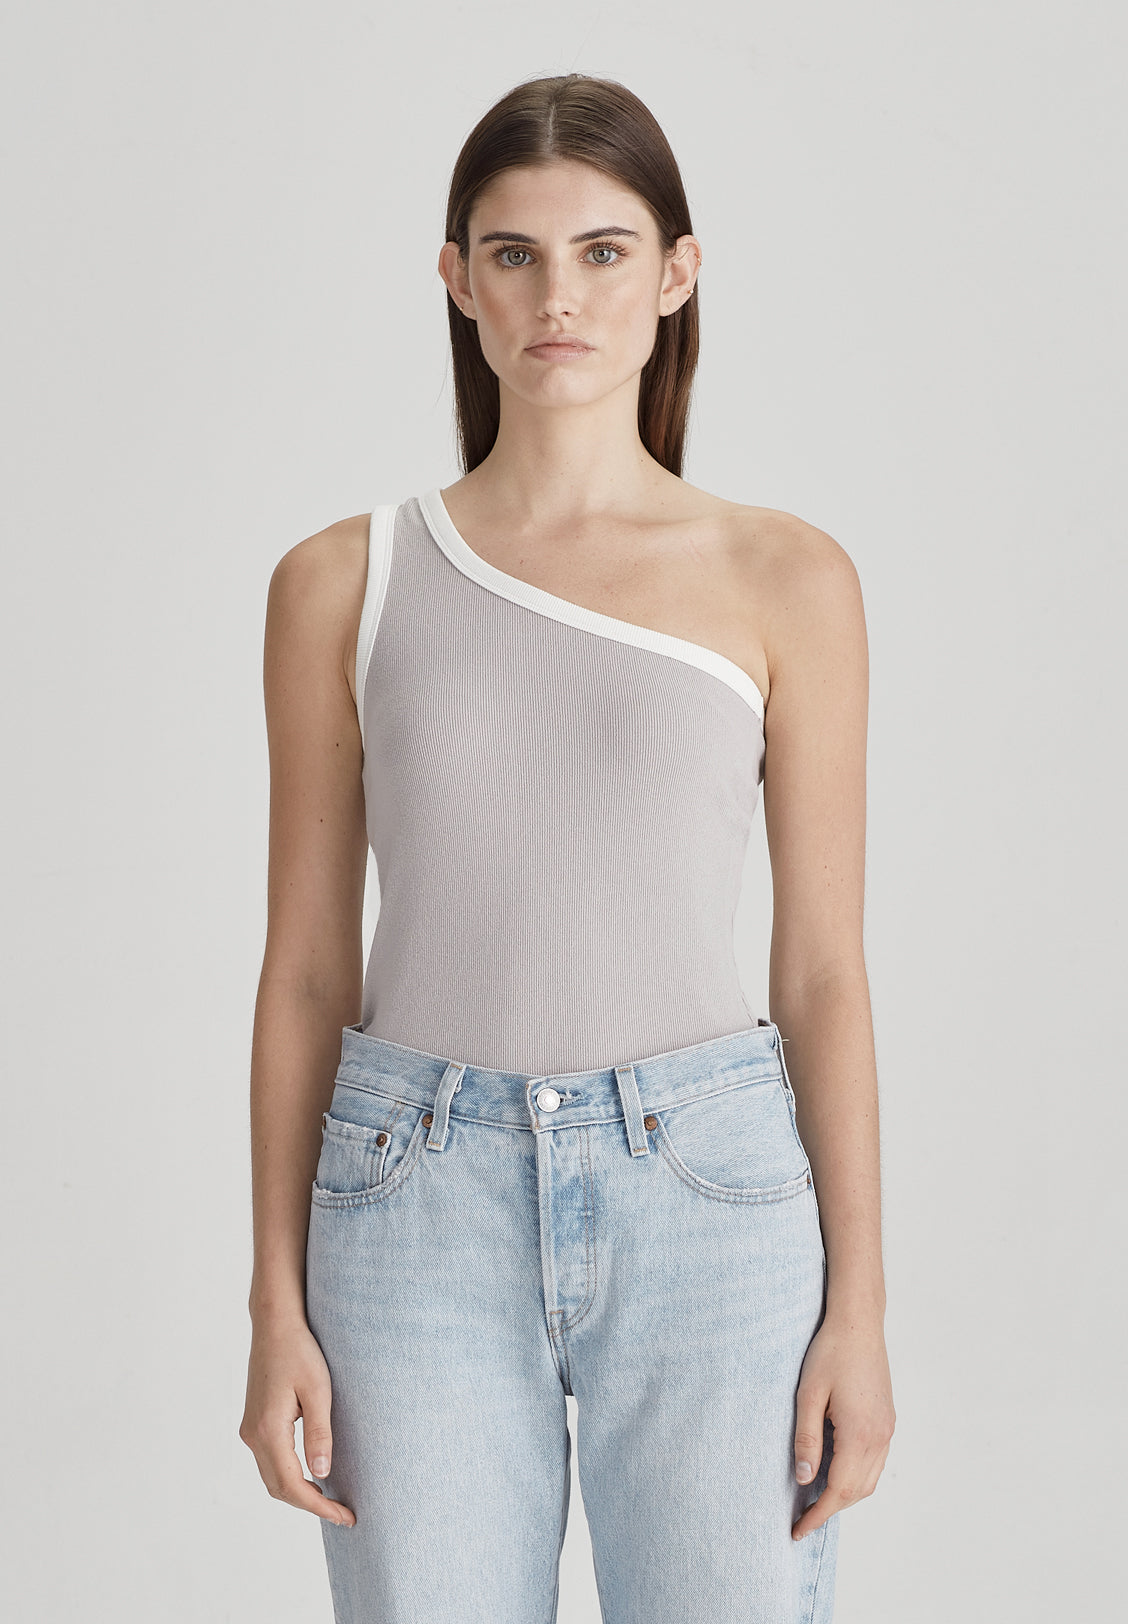 The Commoner One Shoulder Rib Tank is an updated classic featuring a contrast white trim. Its asymmetric design is a fun flattering style. Team back with denim for an easy summer fit.      Designed to be worn close fitted.     Crafted from 98% cotton / 2% span – stretch tight rib.     Asymmetric sleeve design.